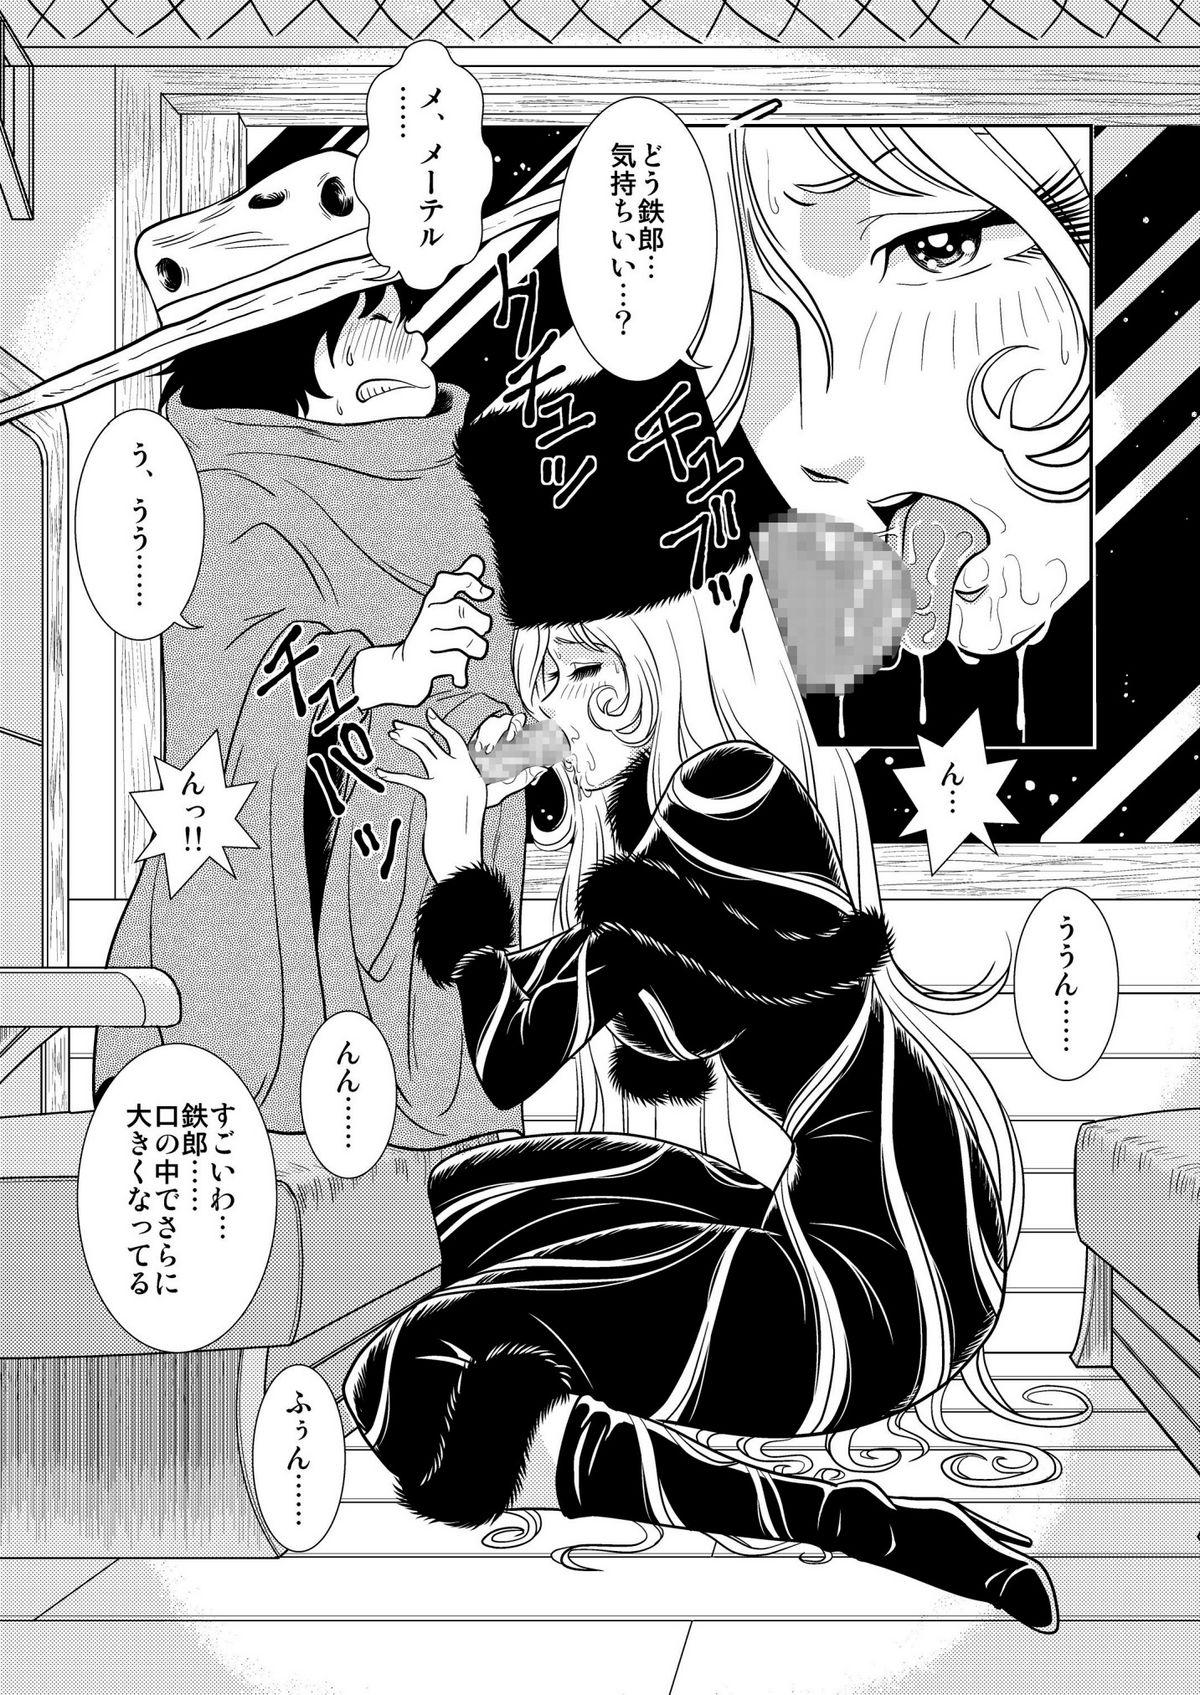 Show Maetel Story 2 - Galaxy express 999 Gay Solo - Page 9